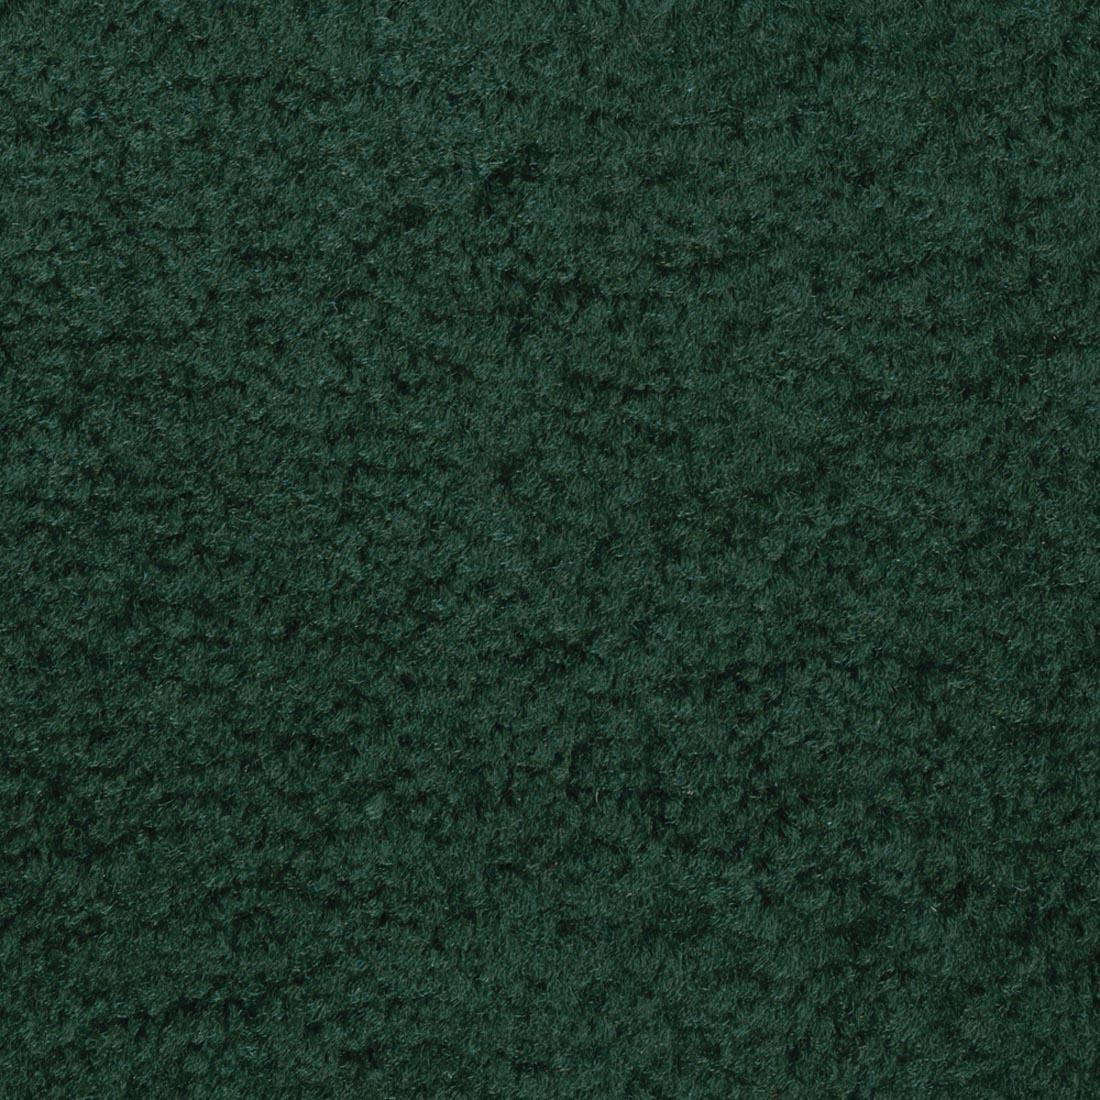 Emerald-colored carpet swatch from the Oval Rug by Carpets For Kids